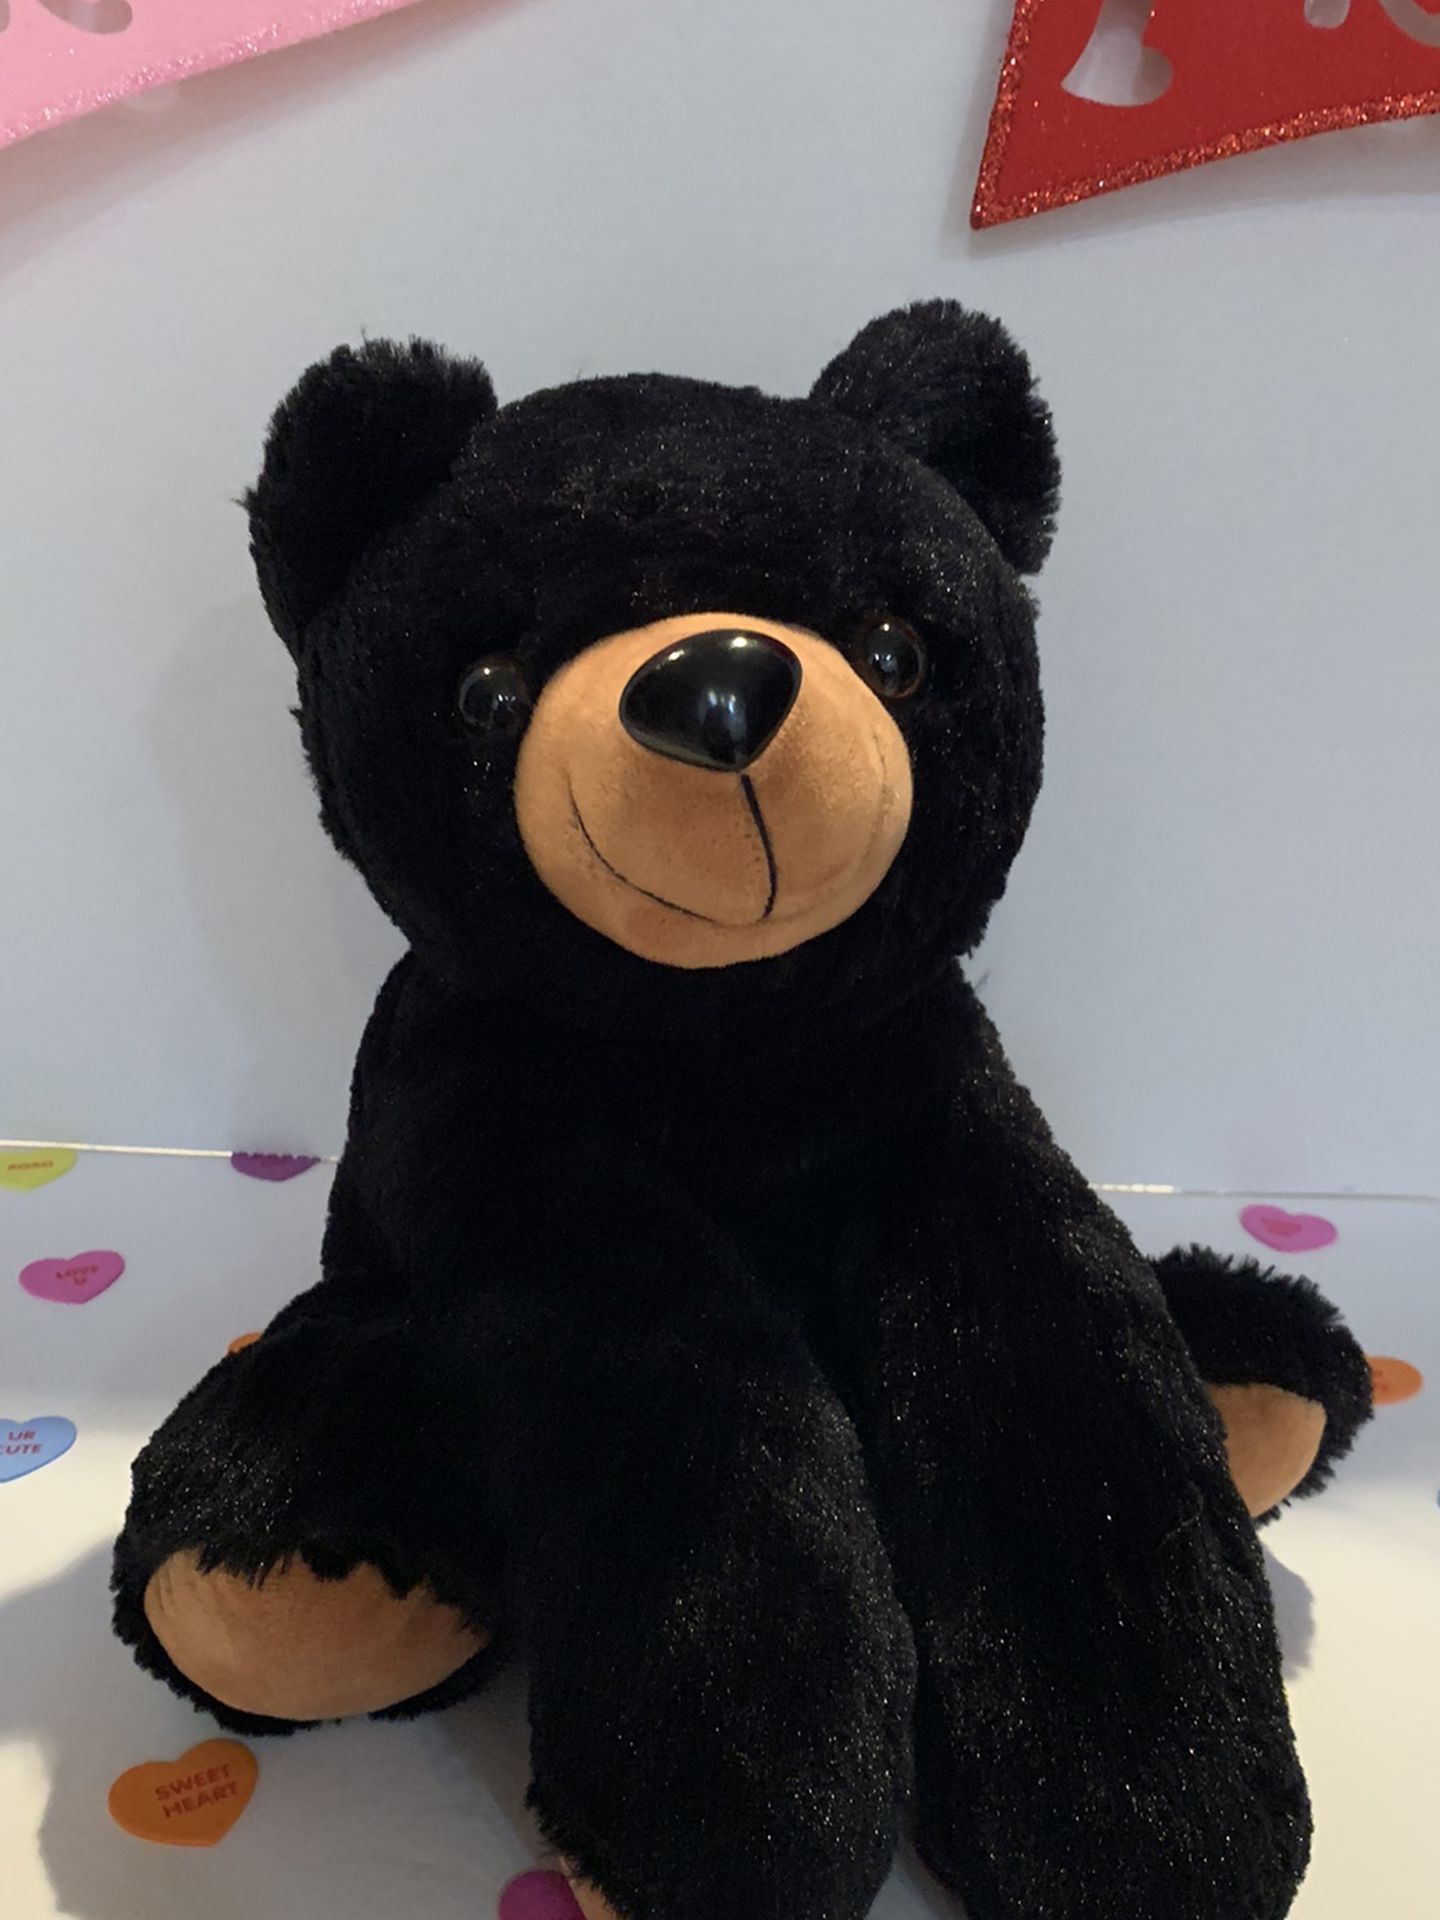 BEAR PLUSH! EXTREMELY SOFT AND SQUEEZABLE ! CLEAN! 13 INCHES !